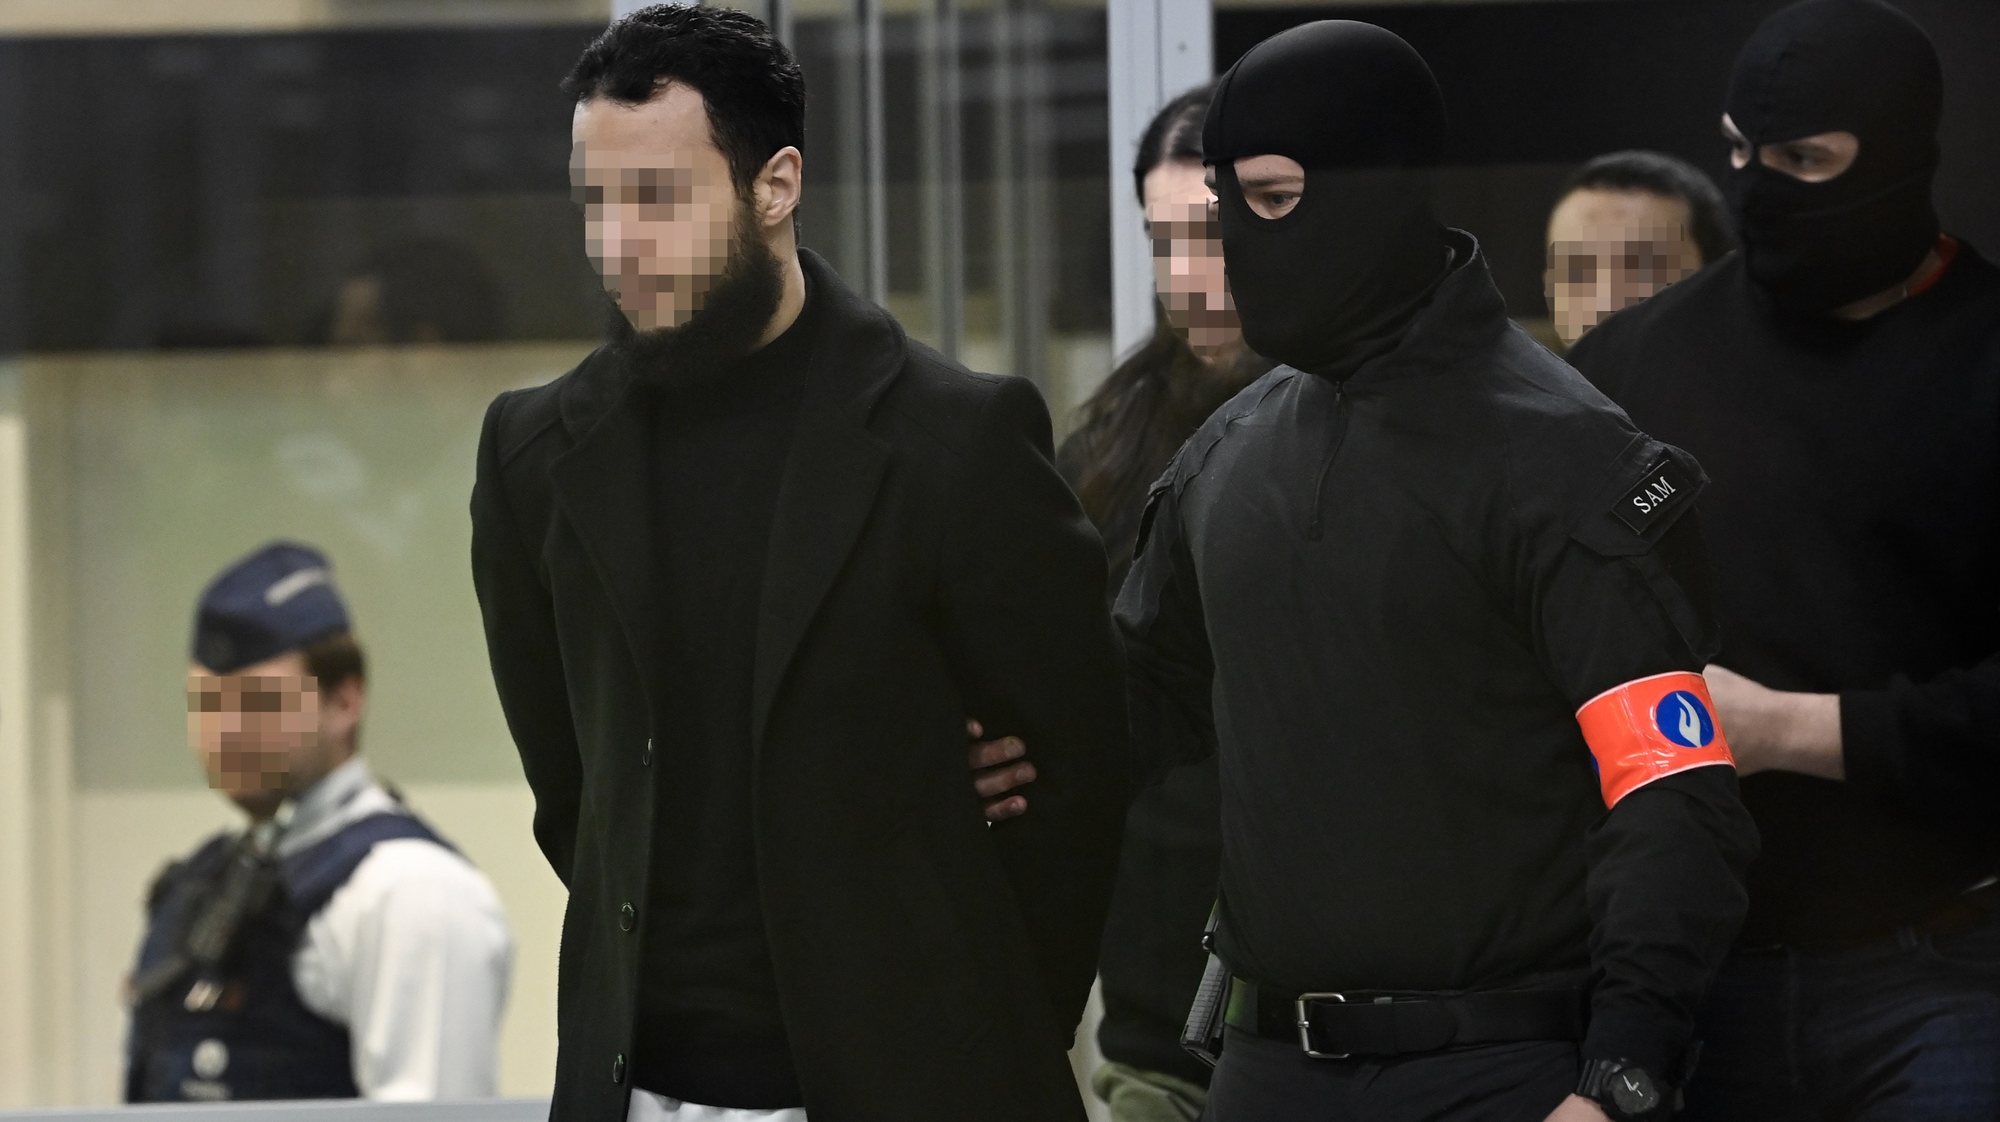 epa10556588 Defendants Salah Abdeslam, Osama Krayem and Mohamed Abrini are escorted by police as they arrive in court during the trial of the 2016 Brussels terror attacks at the Justitia building in Brussels, Belgium, 03 April 2023. Nine defendants are on trial over the March 22, 2016, bomb attacks at Brussels&#039; Zaventem airport and Maelbeek metro station, that killed 32 people, and which were claimed by the Islamic State (IS) extremist group.  EPA/JOHN THYS / POOL  ATTENTION EDITORS: Faces pixelated at source  MAXPPP OUT